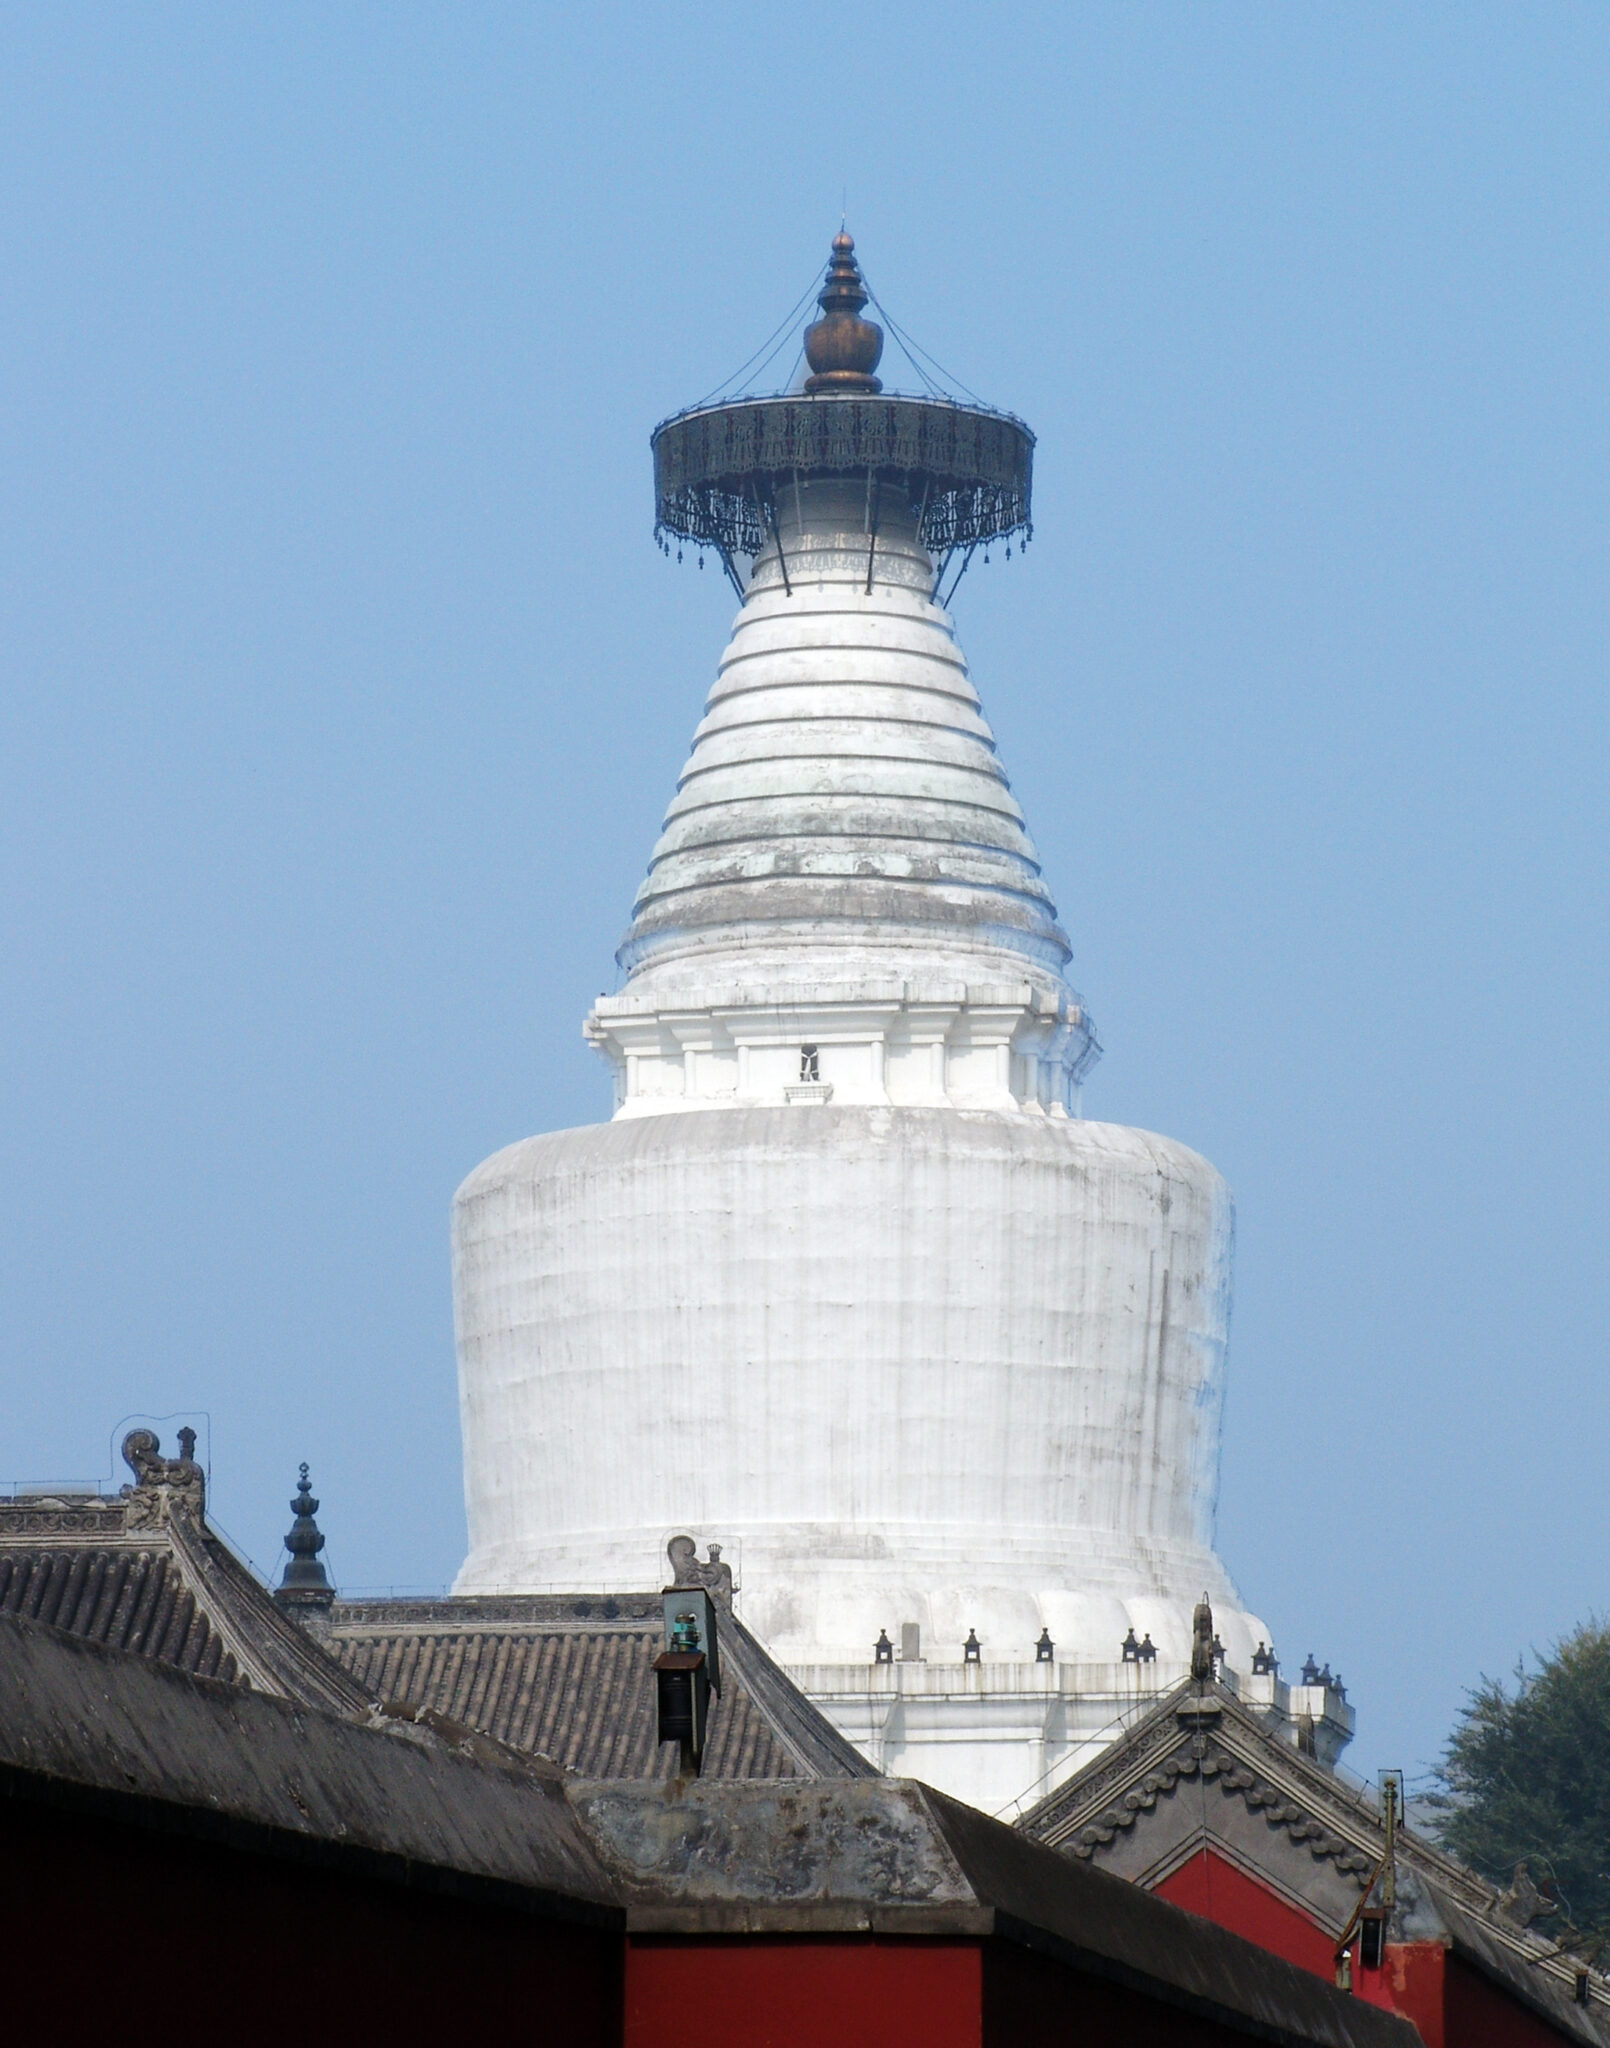 Full view of brilliant white stupa against clear blue sky towering over red buildings with gray tiled roofs